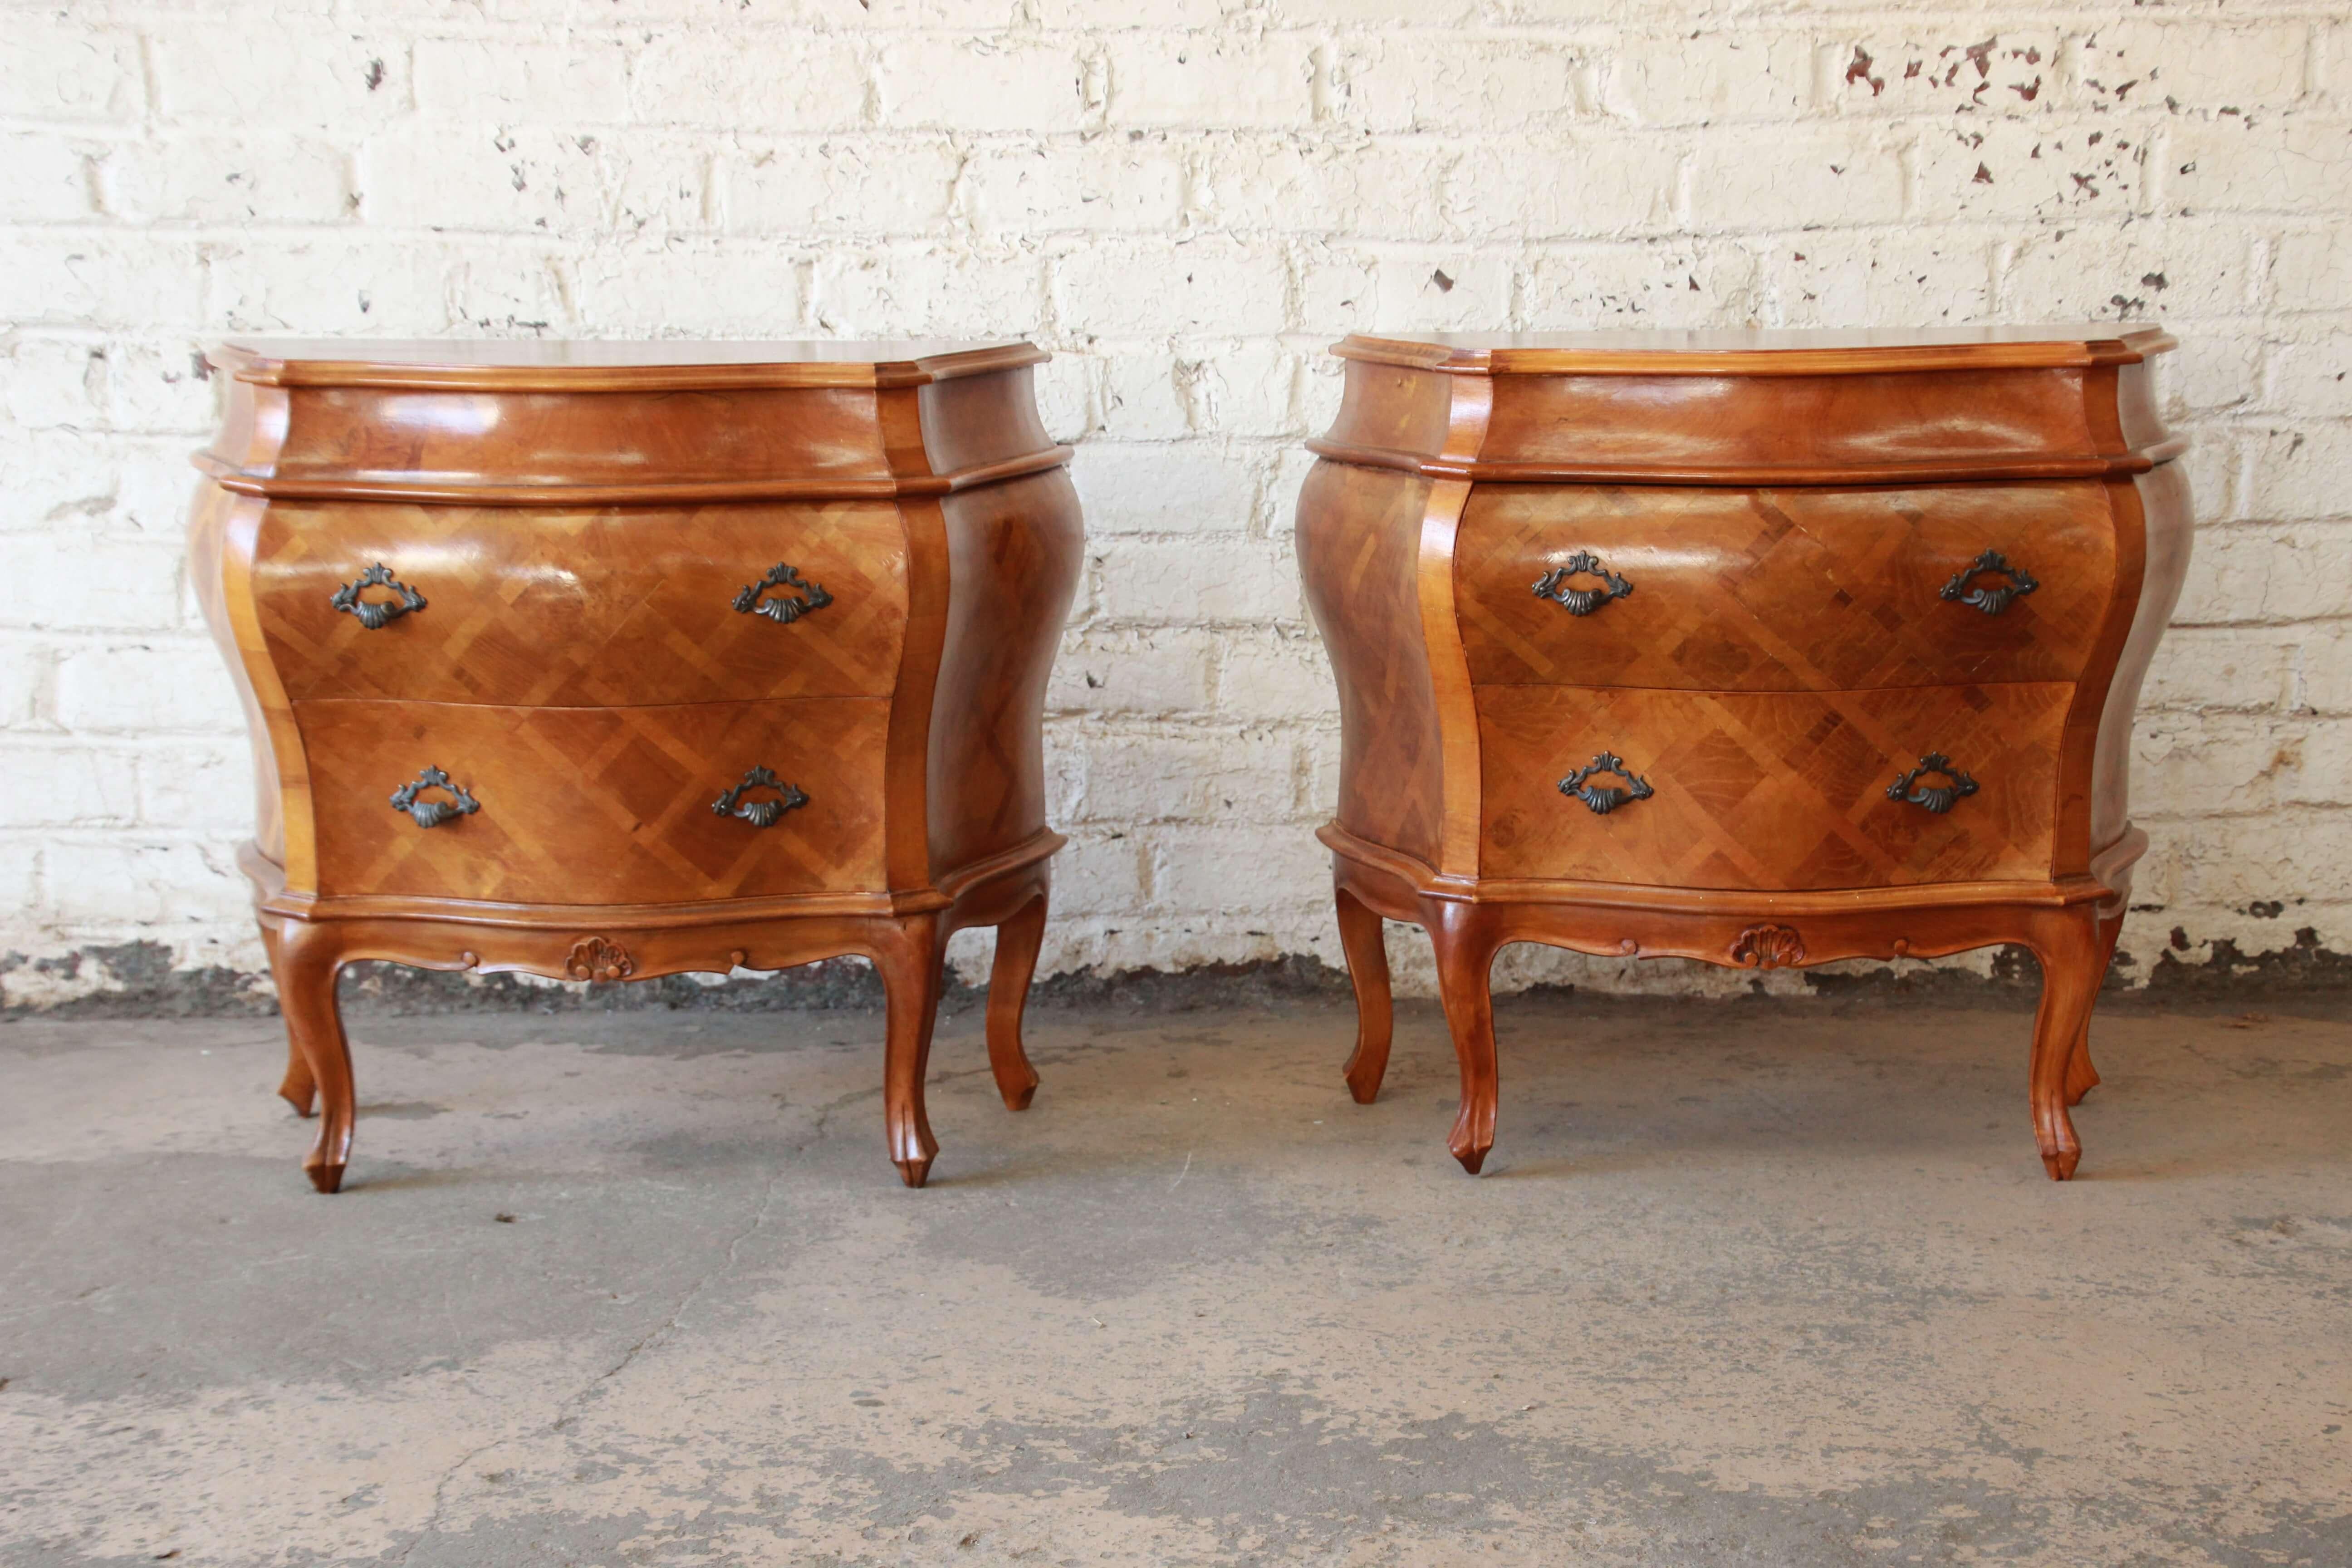 Offering an exceptional pair of parquetry inlaid Italian Bombay chest nightstand. The pair of chests have a beautiful parquetry inlaid design and are finished on the back sides. Both feature two large drawers for ample storage with shell designed